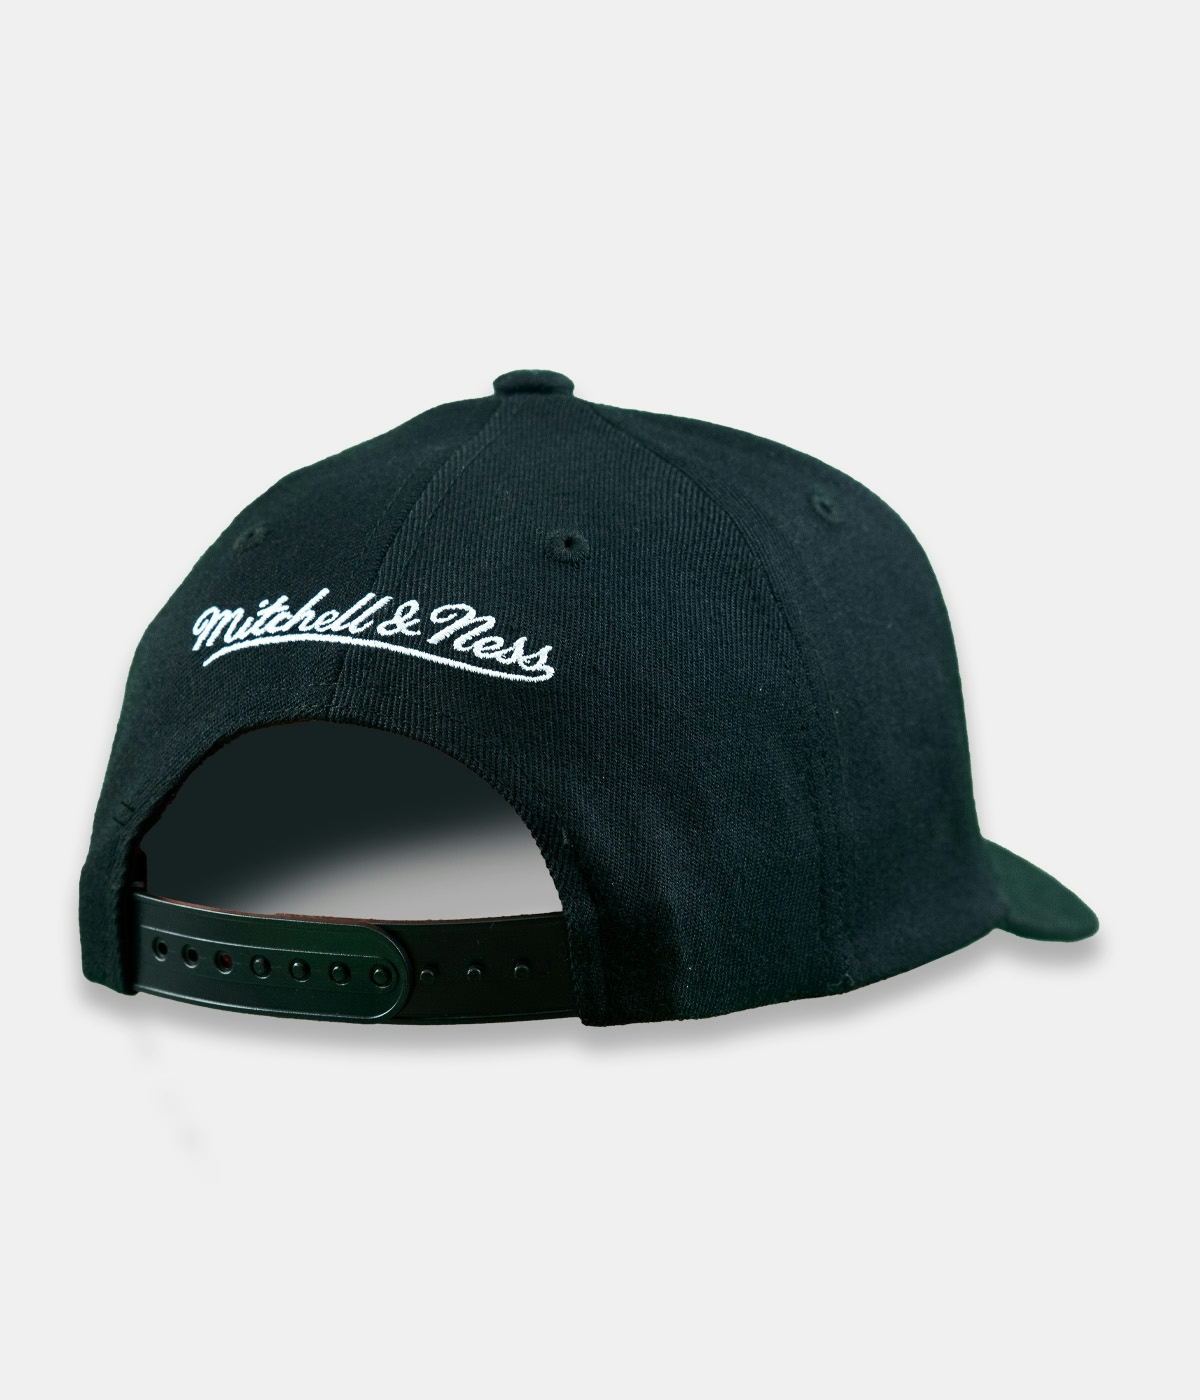 Mitchell & Ness Cap Zone Classic Red - Own Brand Green 2